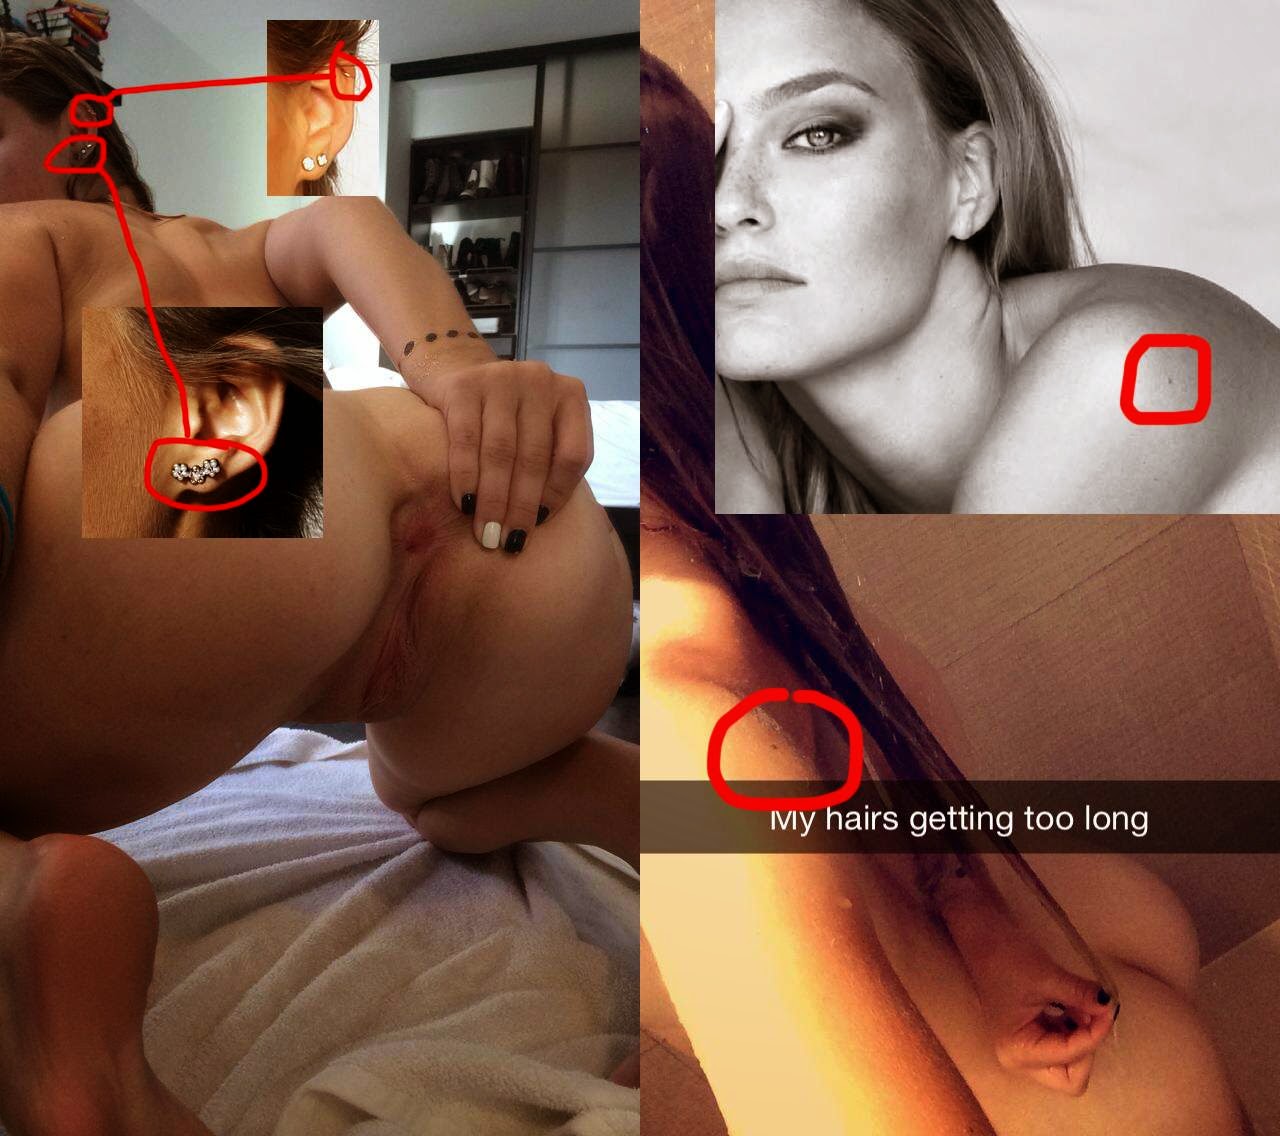 Becca tobin leaked nudes – Thefappening.pm – Celebrity photo leaks